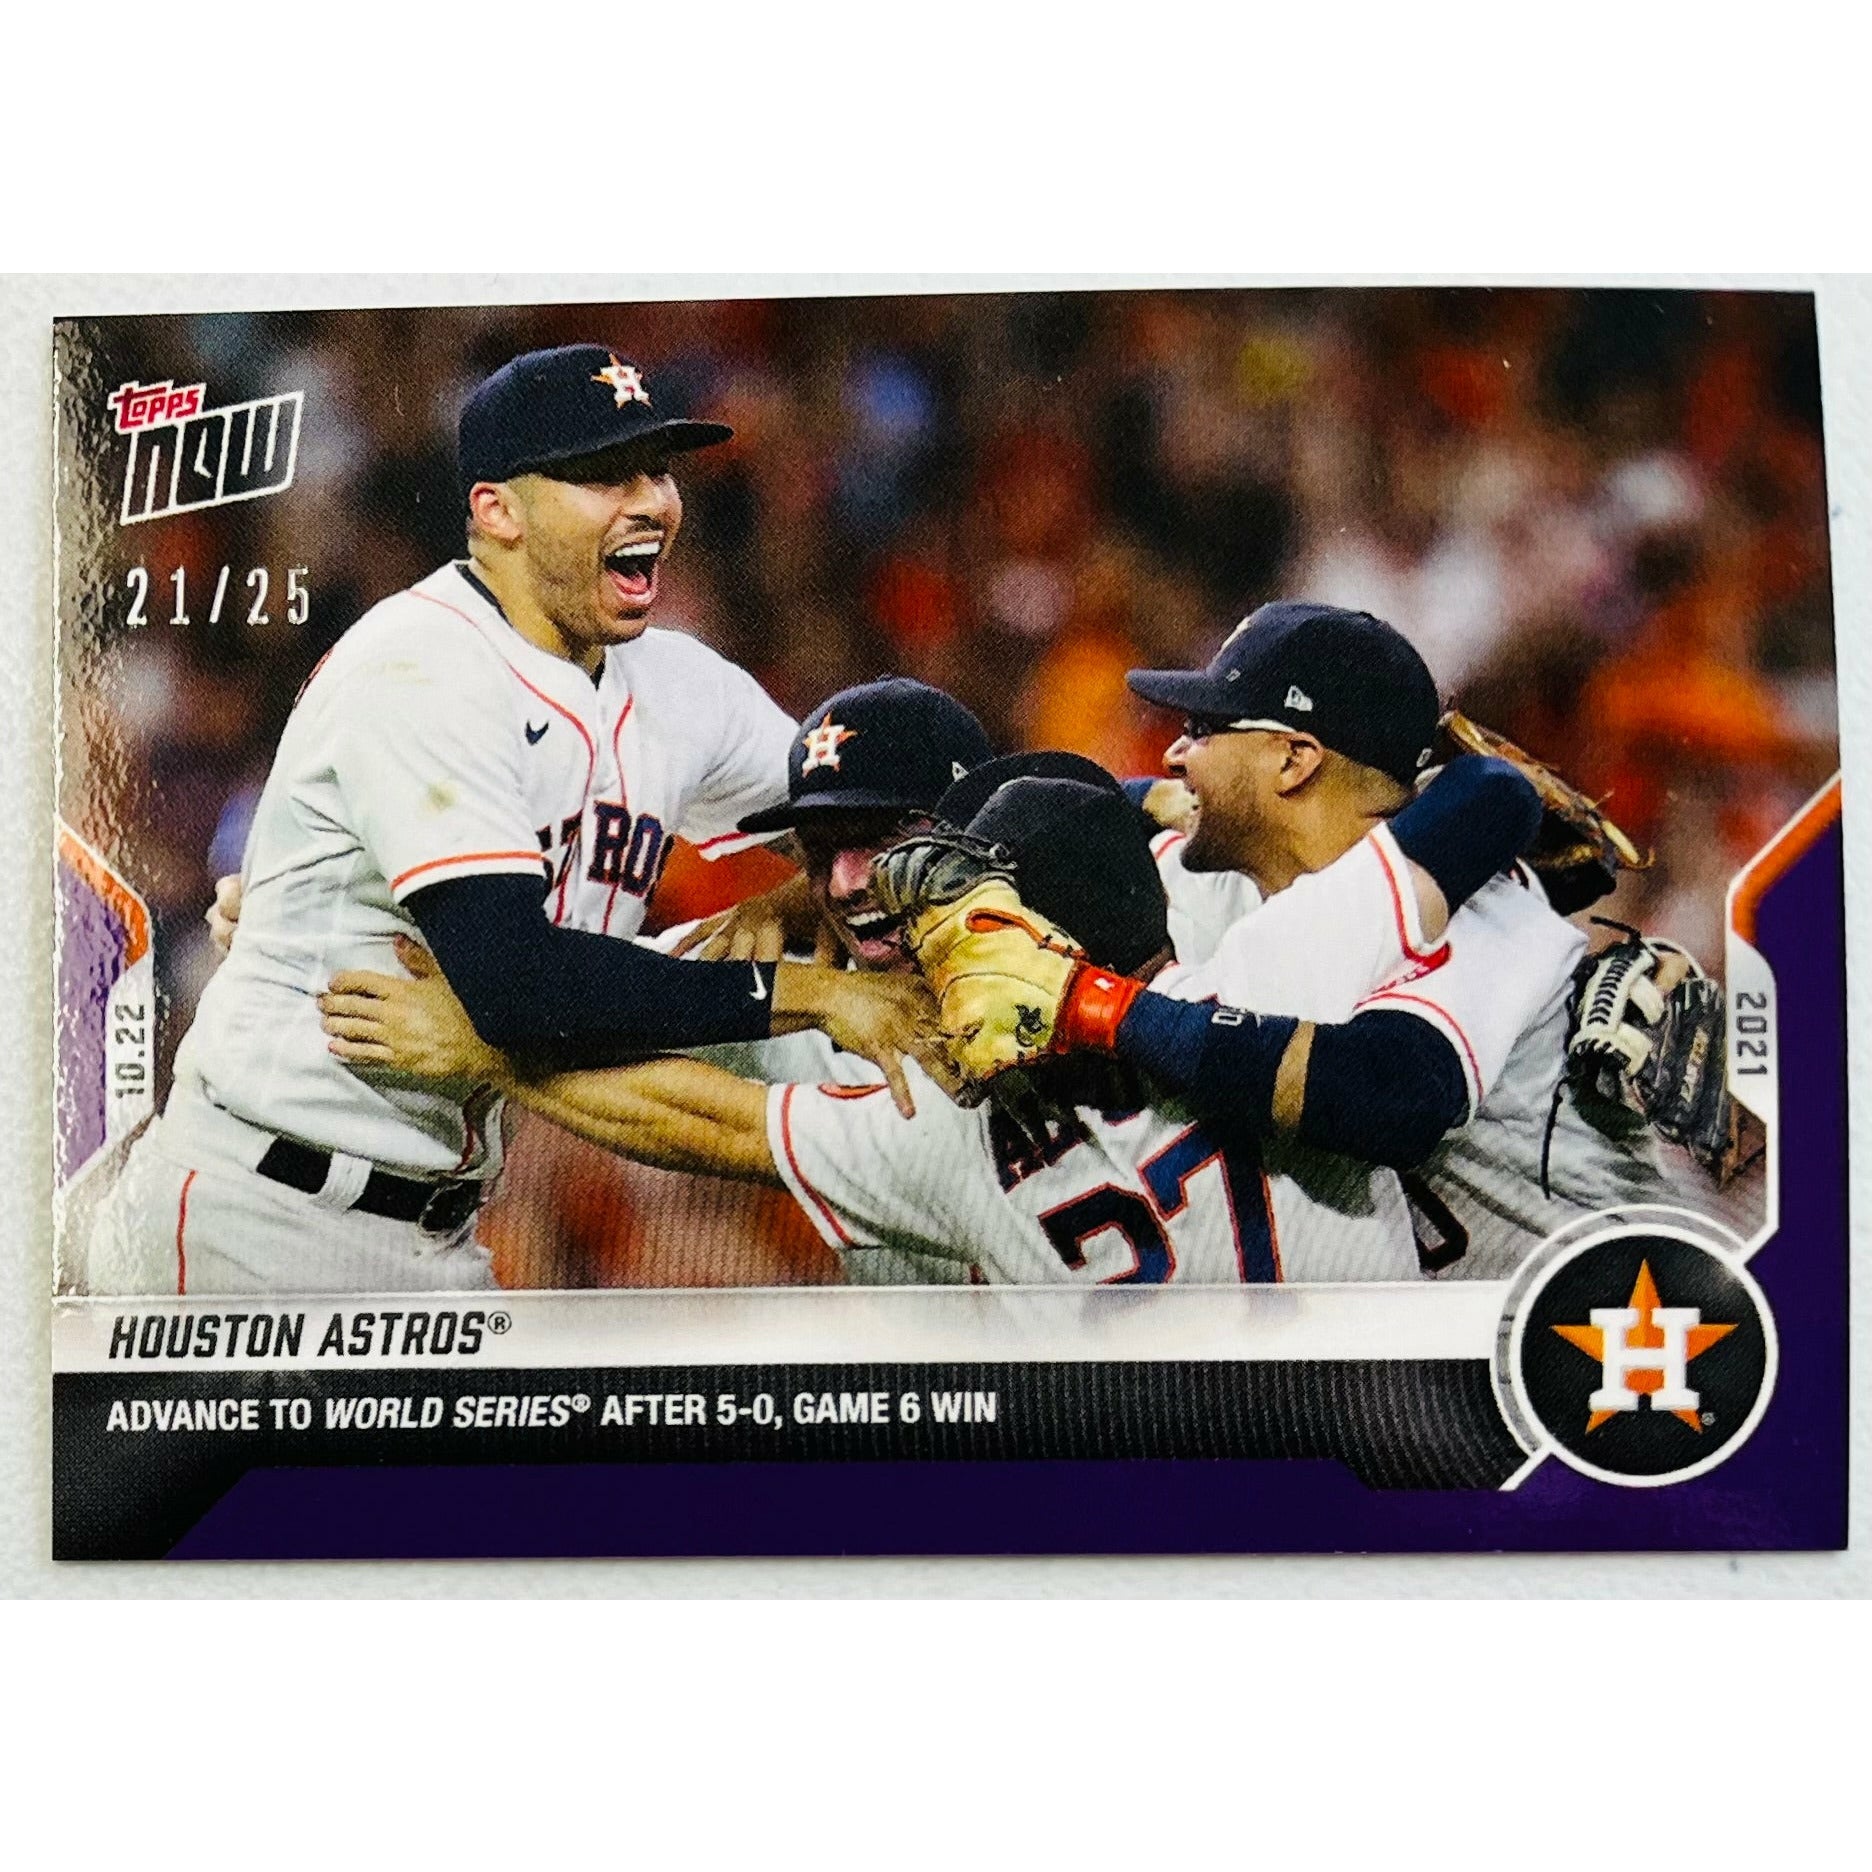 Houston Astros Advance to WS 2021 MLB TOPPS NOW Card 1006 Purple Parallel 21/25